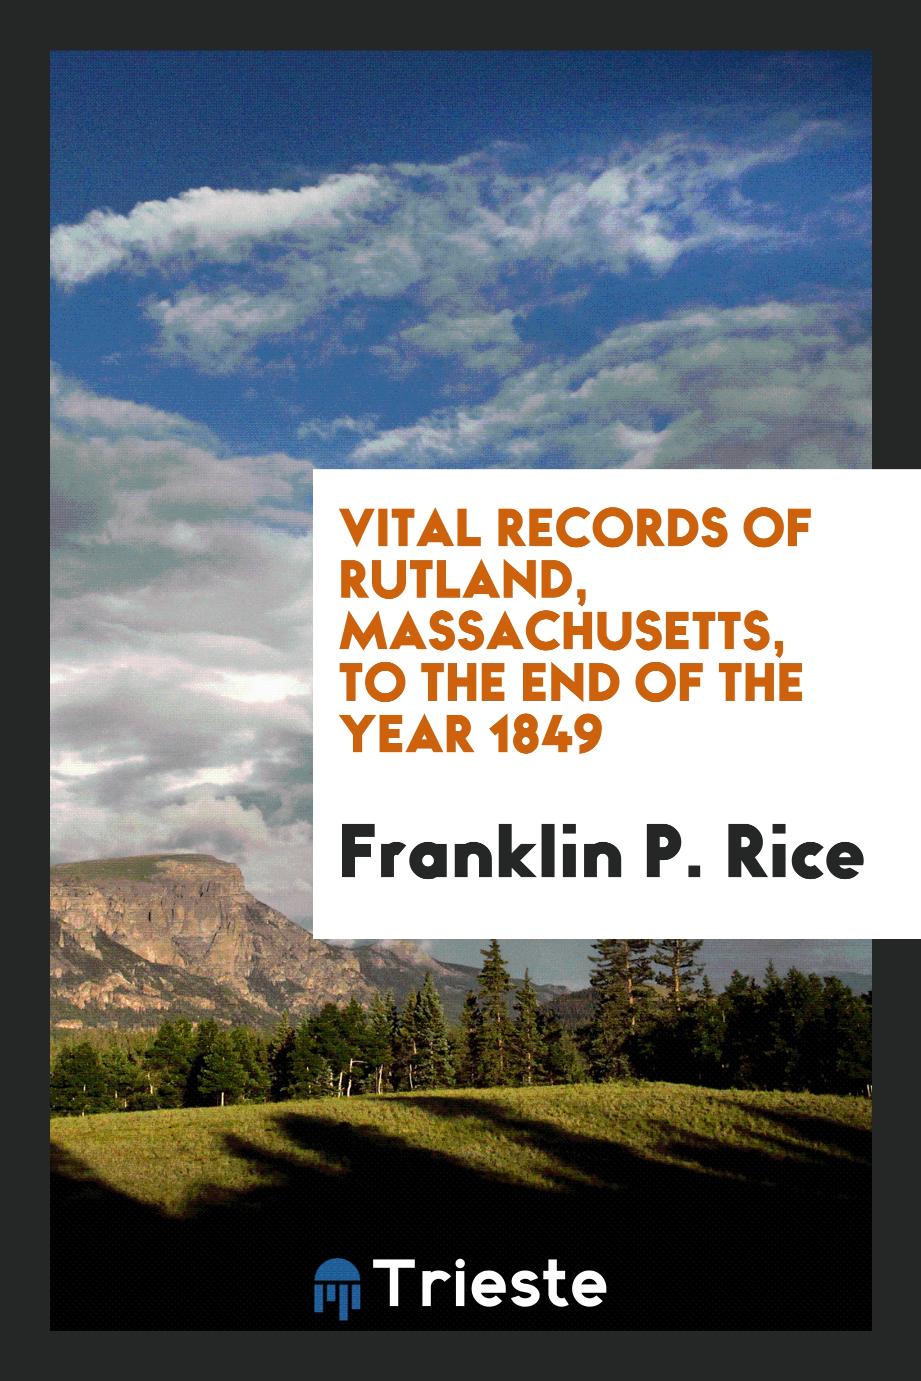 Vital records of Rutland, Massachusetts, to the end of the year 1849